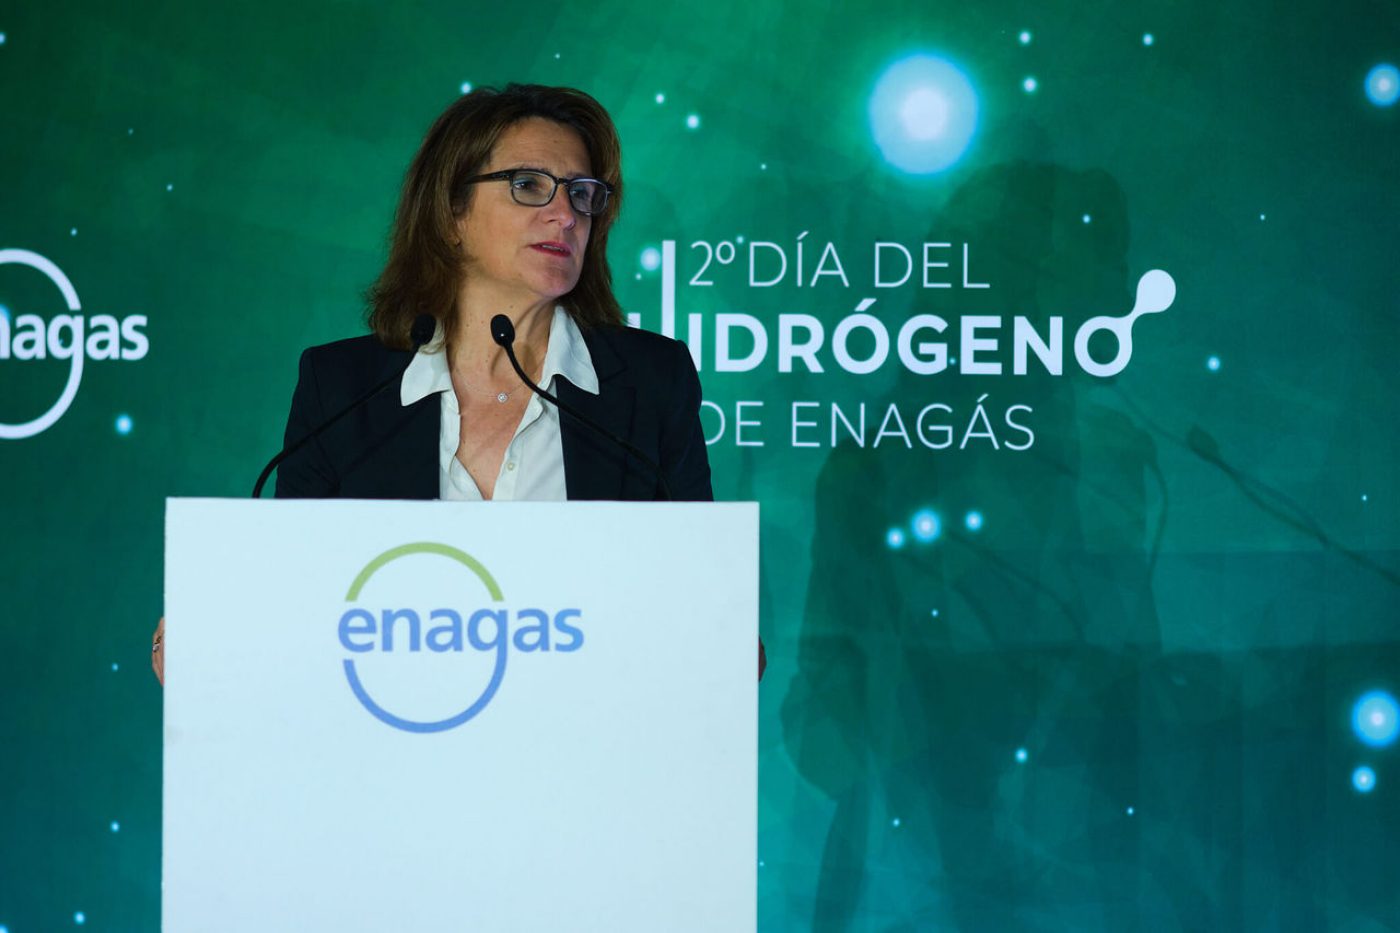 Opening intervention of the Third Vice-President of the Government at the 2nd Enagás Hydrogen Day